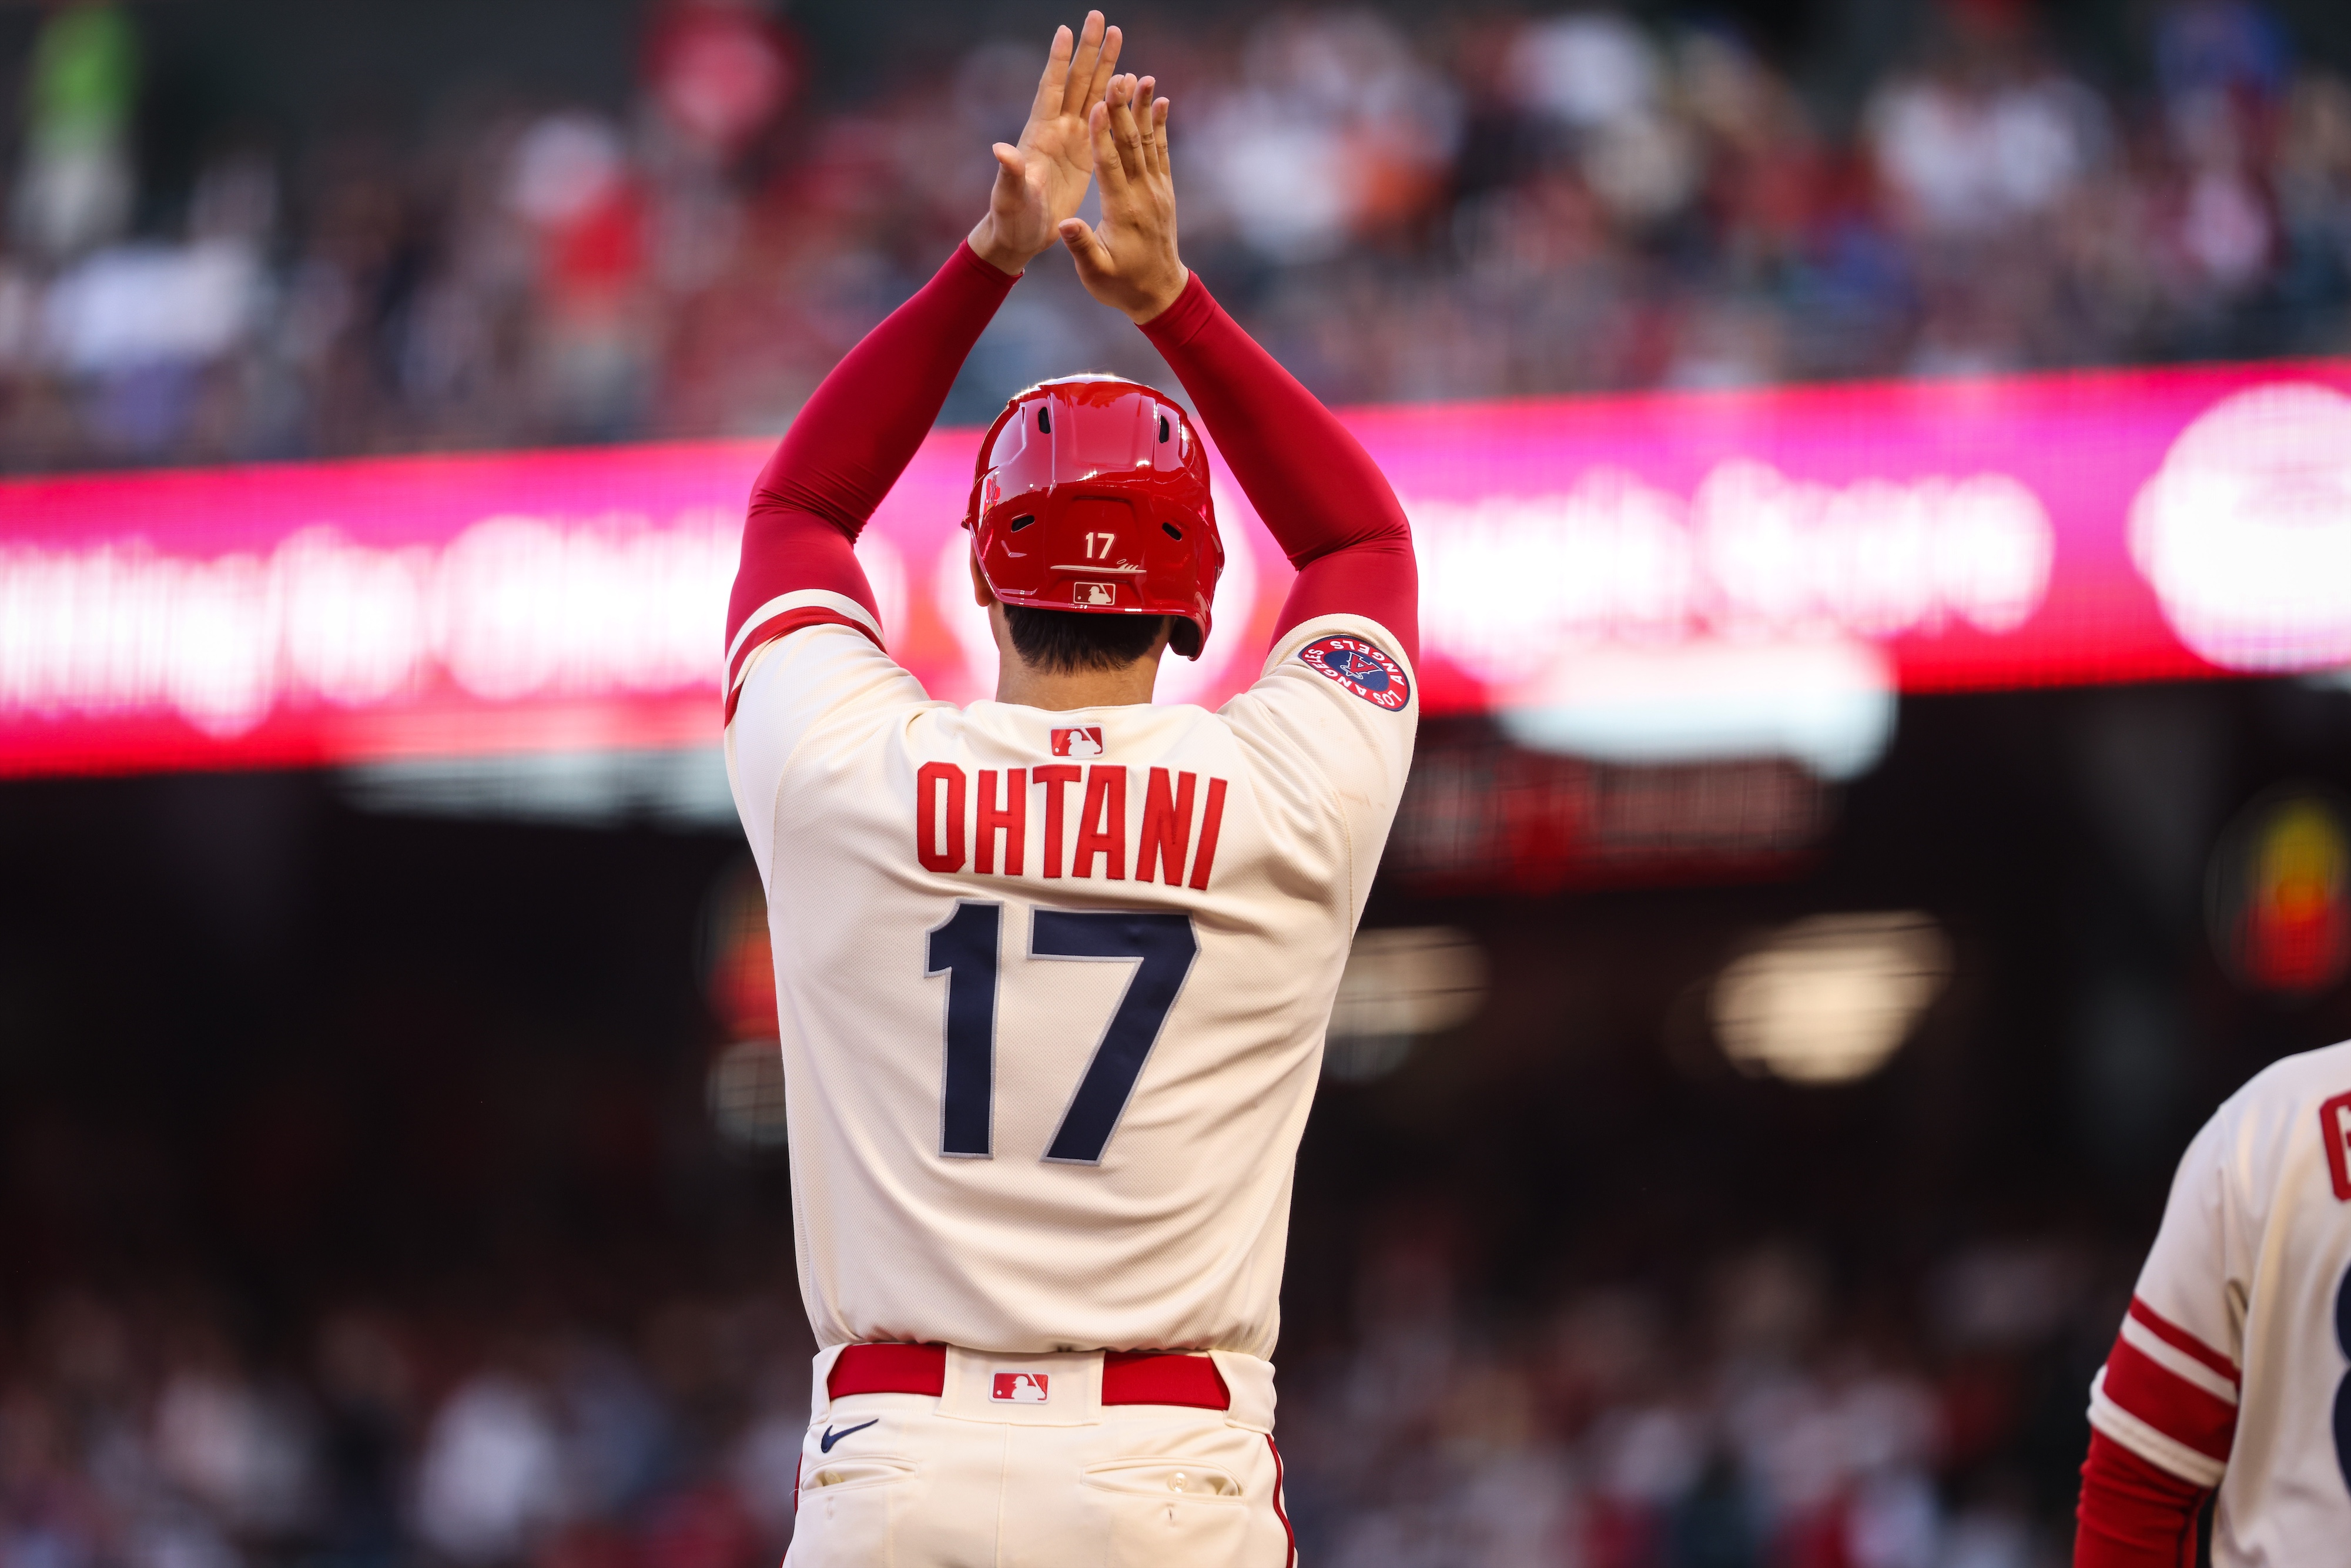 angels city connect ohtani jersey